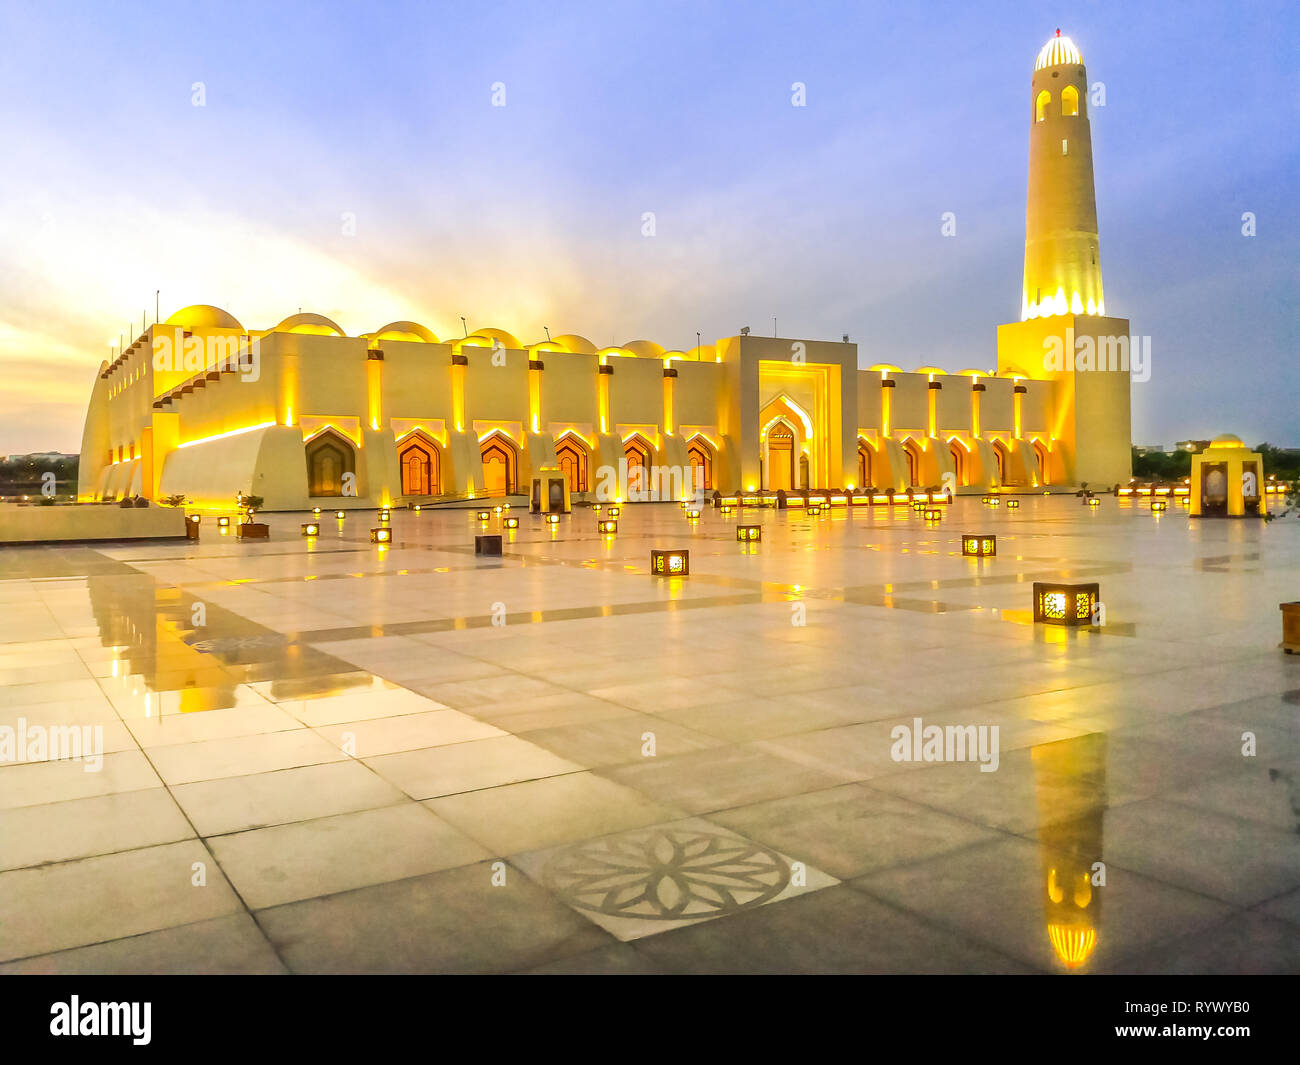 Scenic Doha Grand Mosque with minaret illuminated, mirrors on the outdoor marble pavement. Qatar State Mosque, Middle East, Arabian Peninsula in Stock Photo